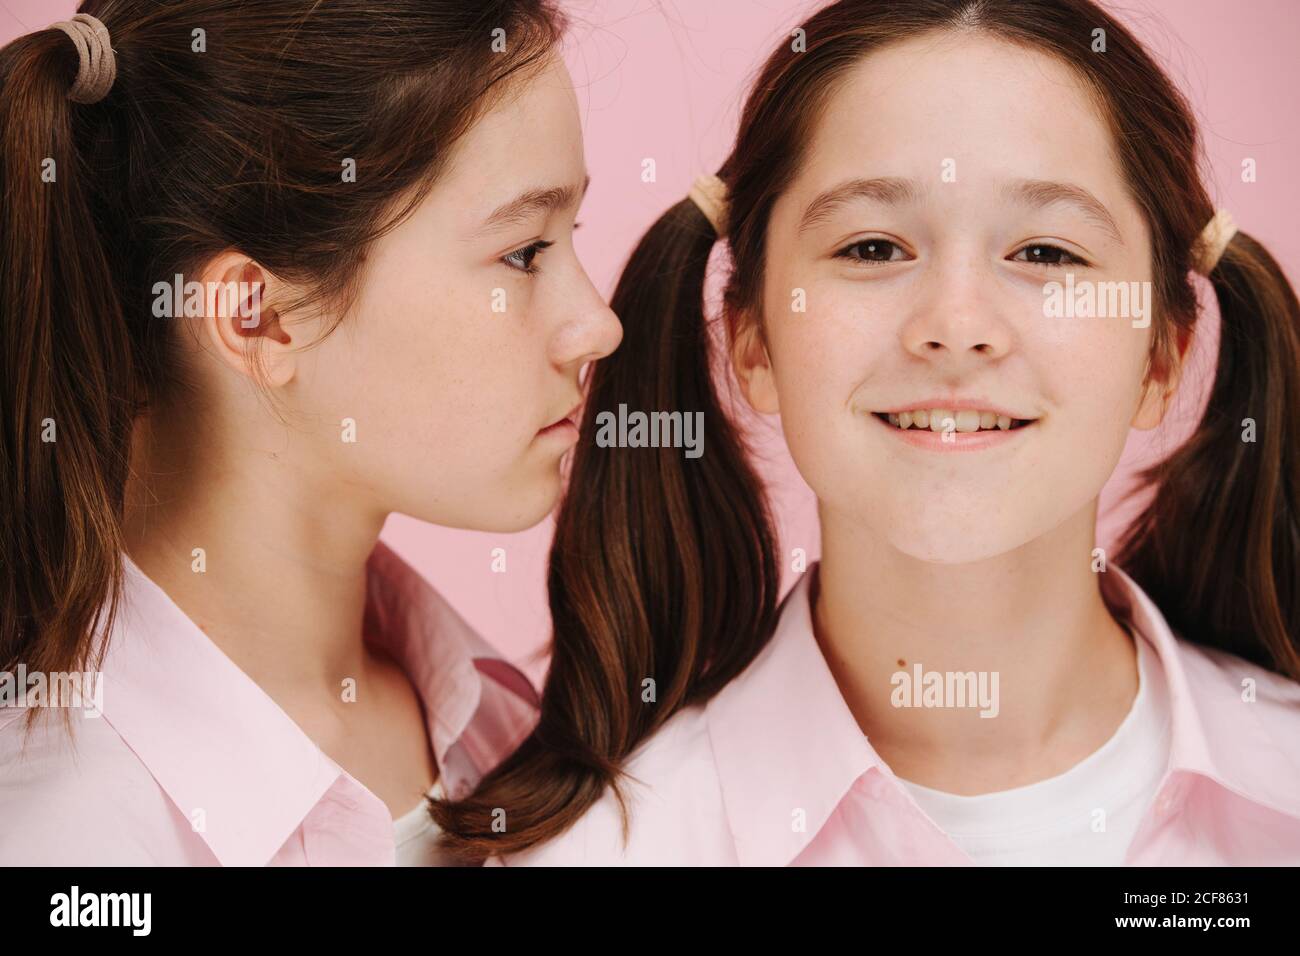 Beautiful little twin sisters posing. One is facing side other facing forward. Stock Photo